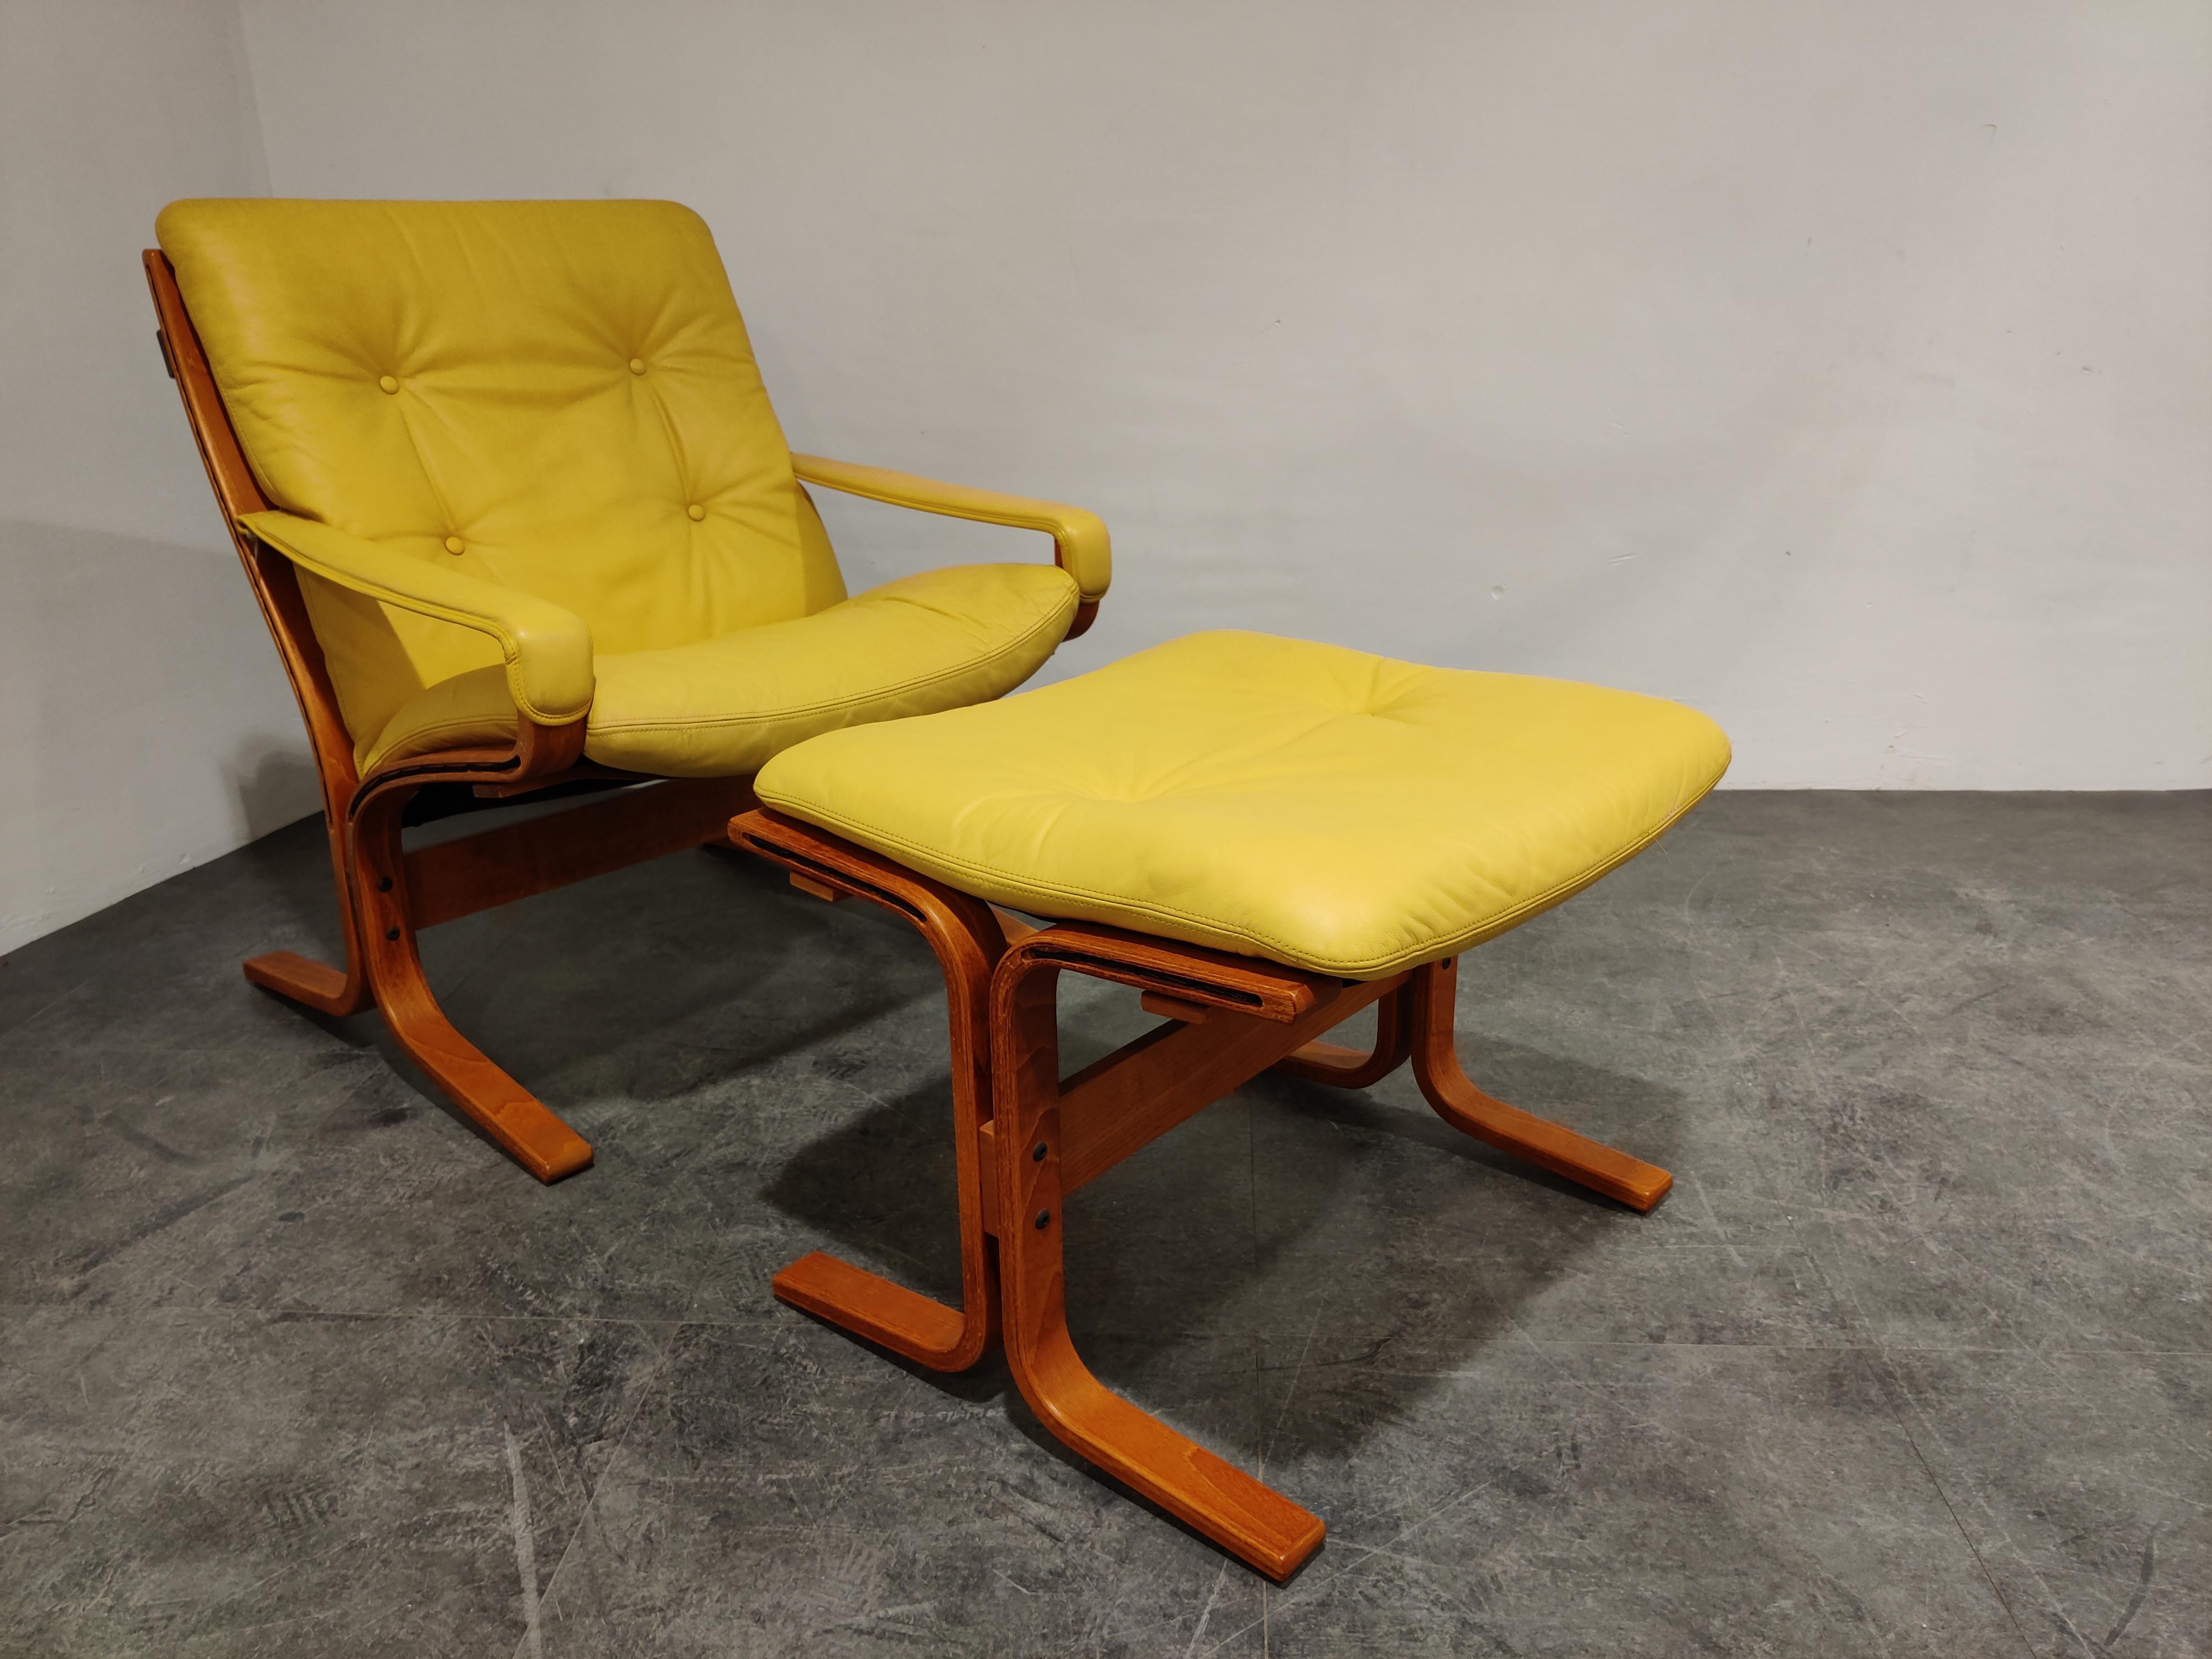 Midcentury armchair designed by Ingmar Relling for Westnofa.

Comes in a light yellow upholstery with a matching ottoman/stool.

The color of leather is a great combination with the wood color.

Very good condition

Will be disassembled for